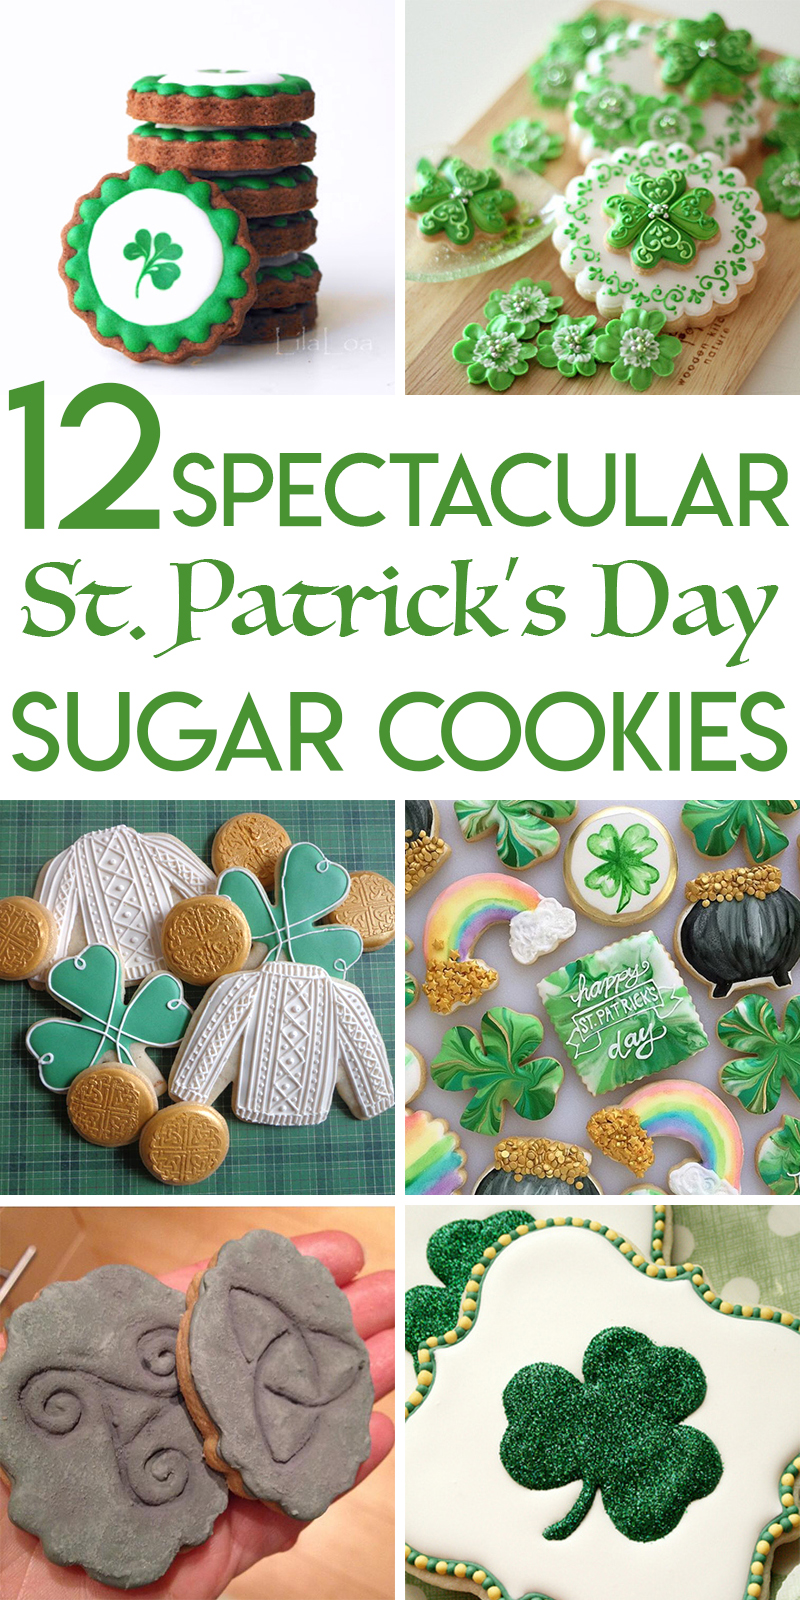 12 Stunning St. Patrick’s Day Sugar Cookies | Random Acts of Baking